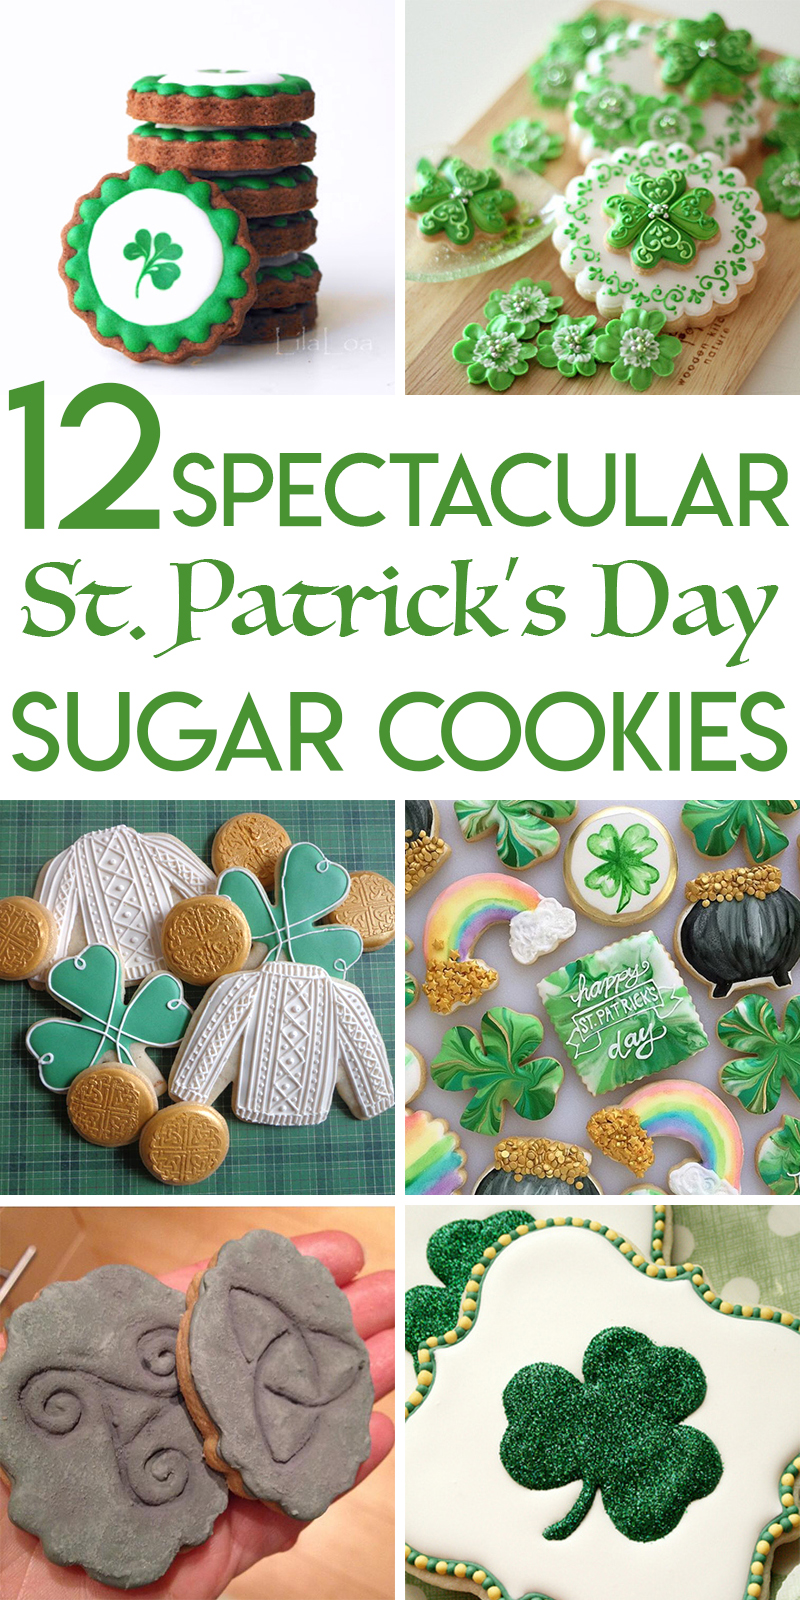 12 Stunning St. Patrick’s Day Sugar Cookies | Random Acts of Baking